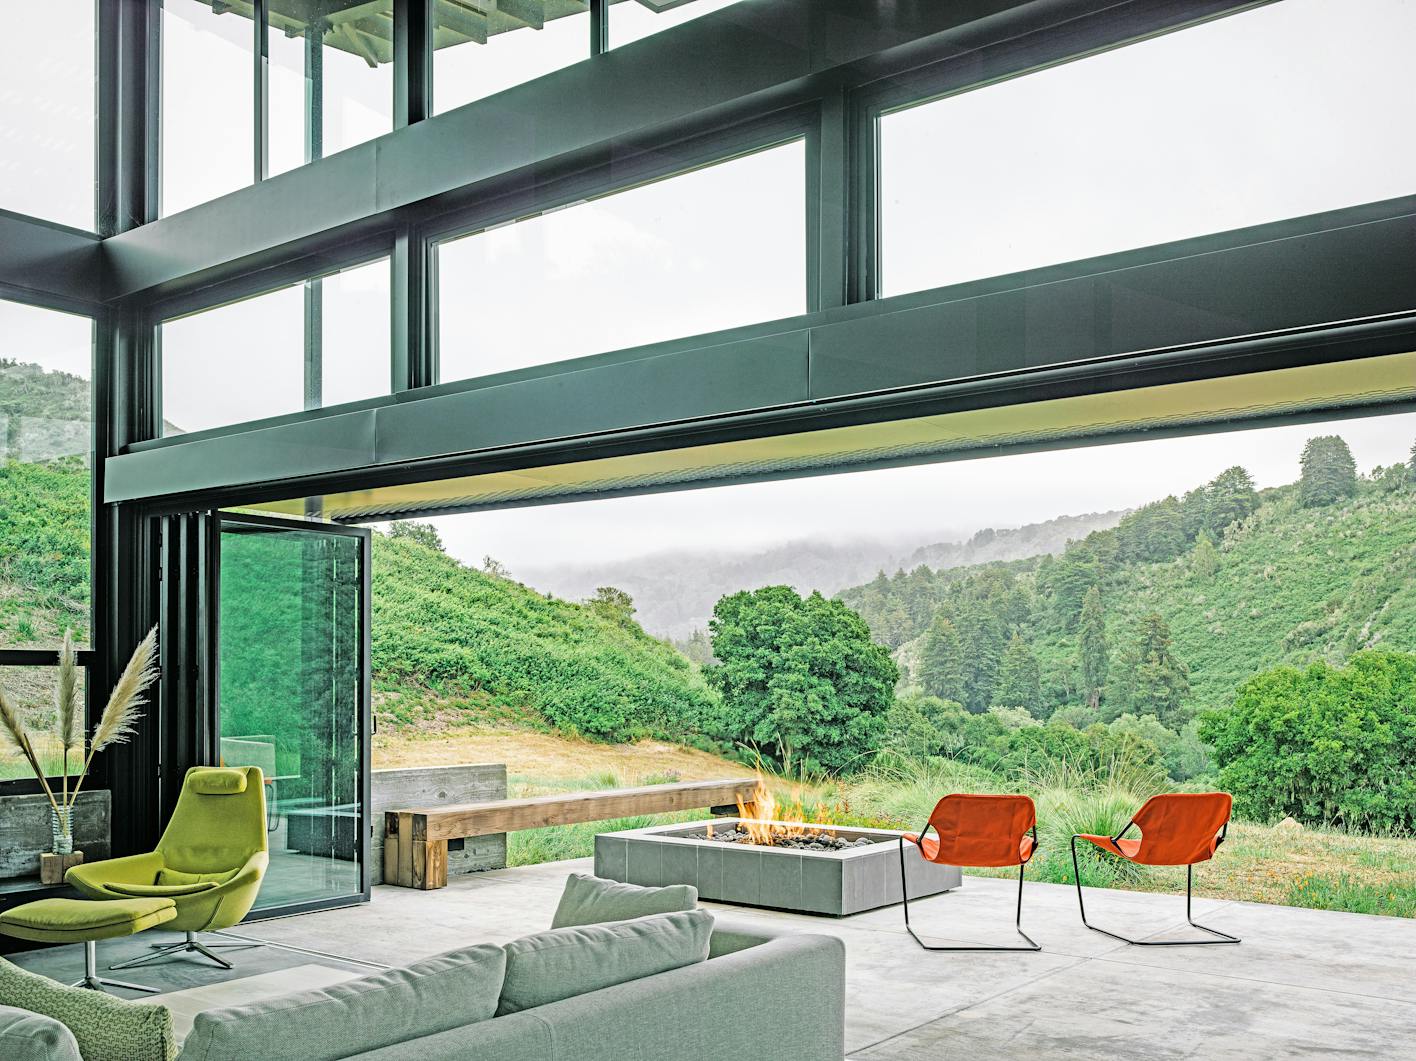 large glass windows let in natural light 